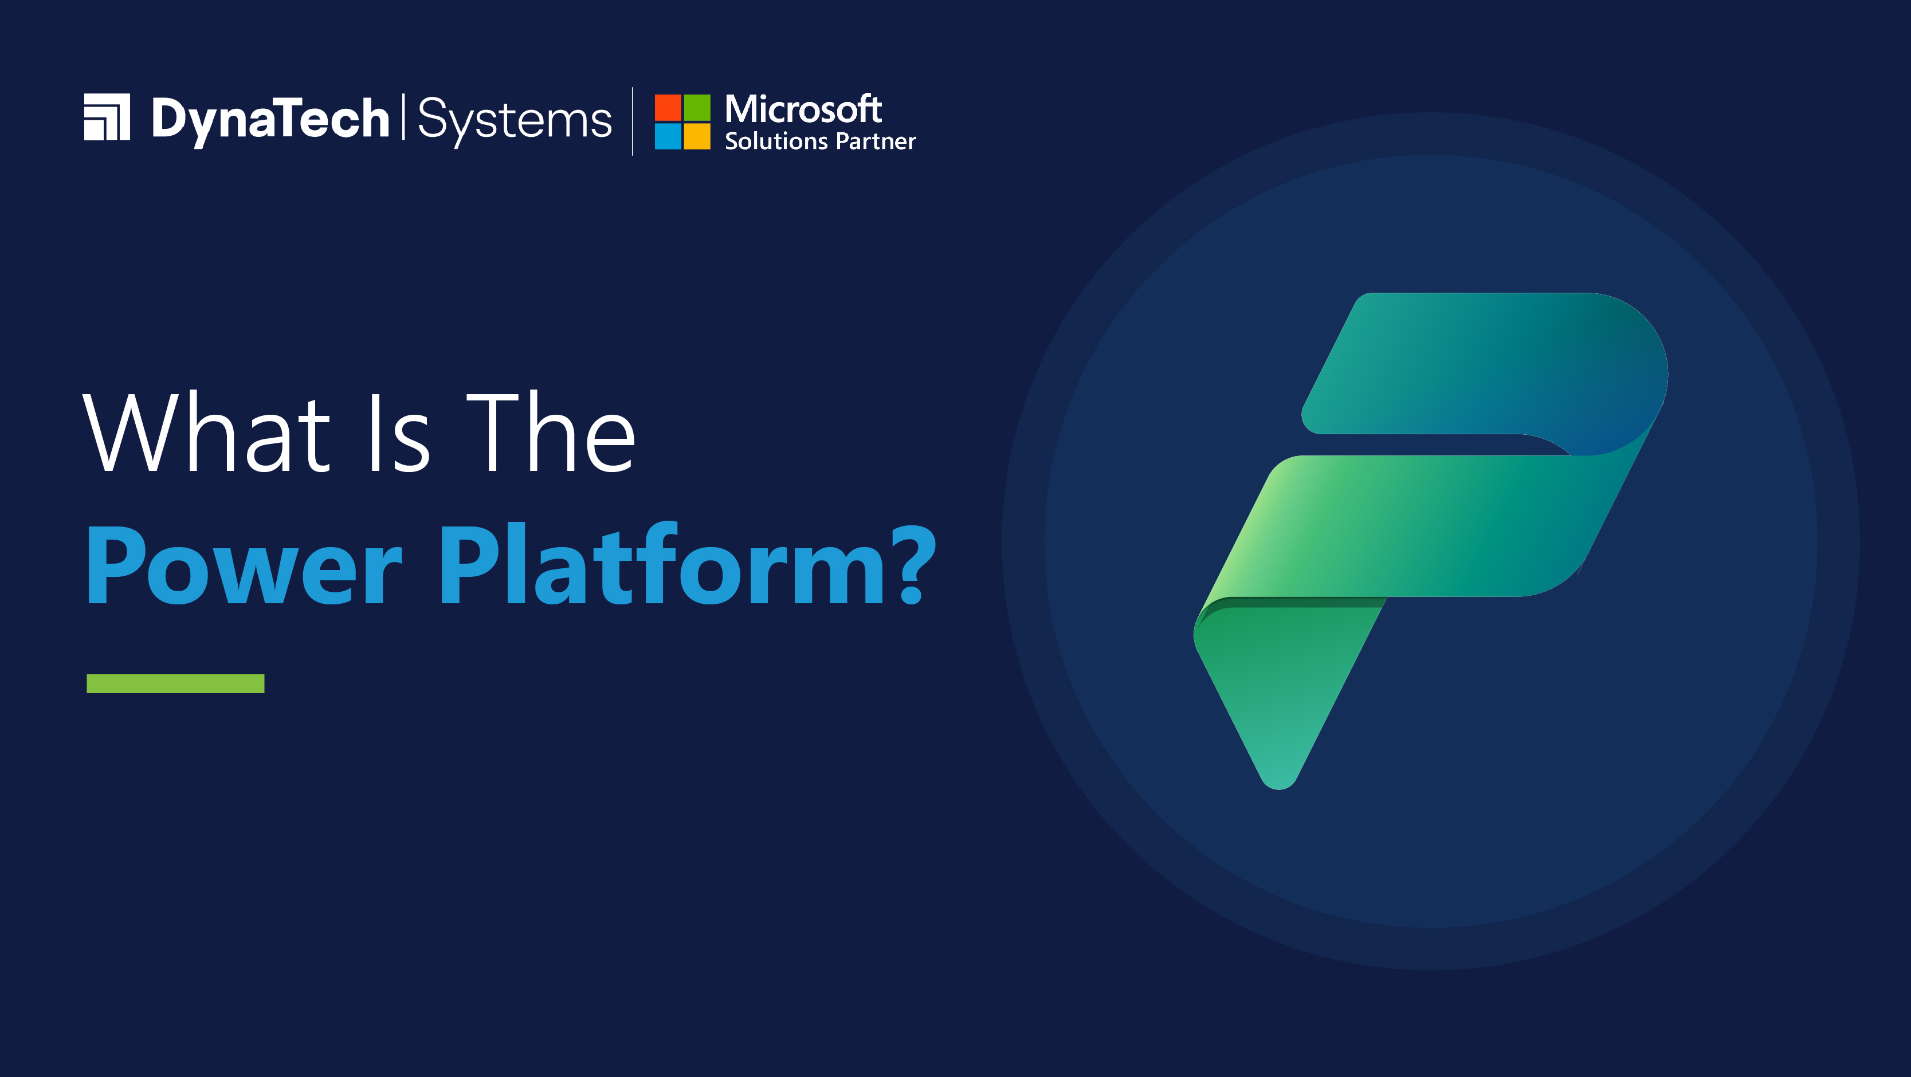 What Is The Power Platform?